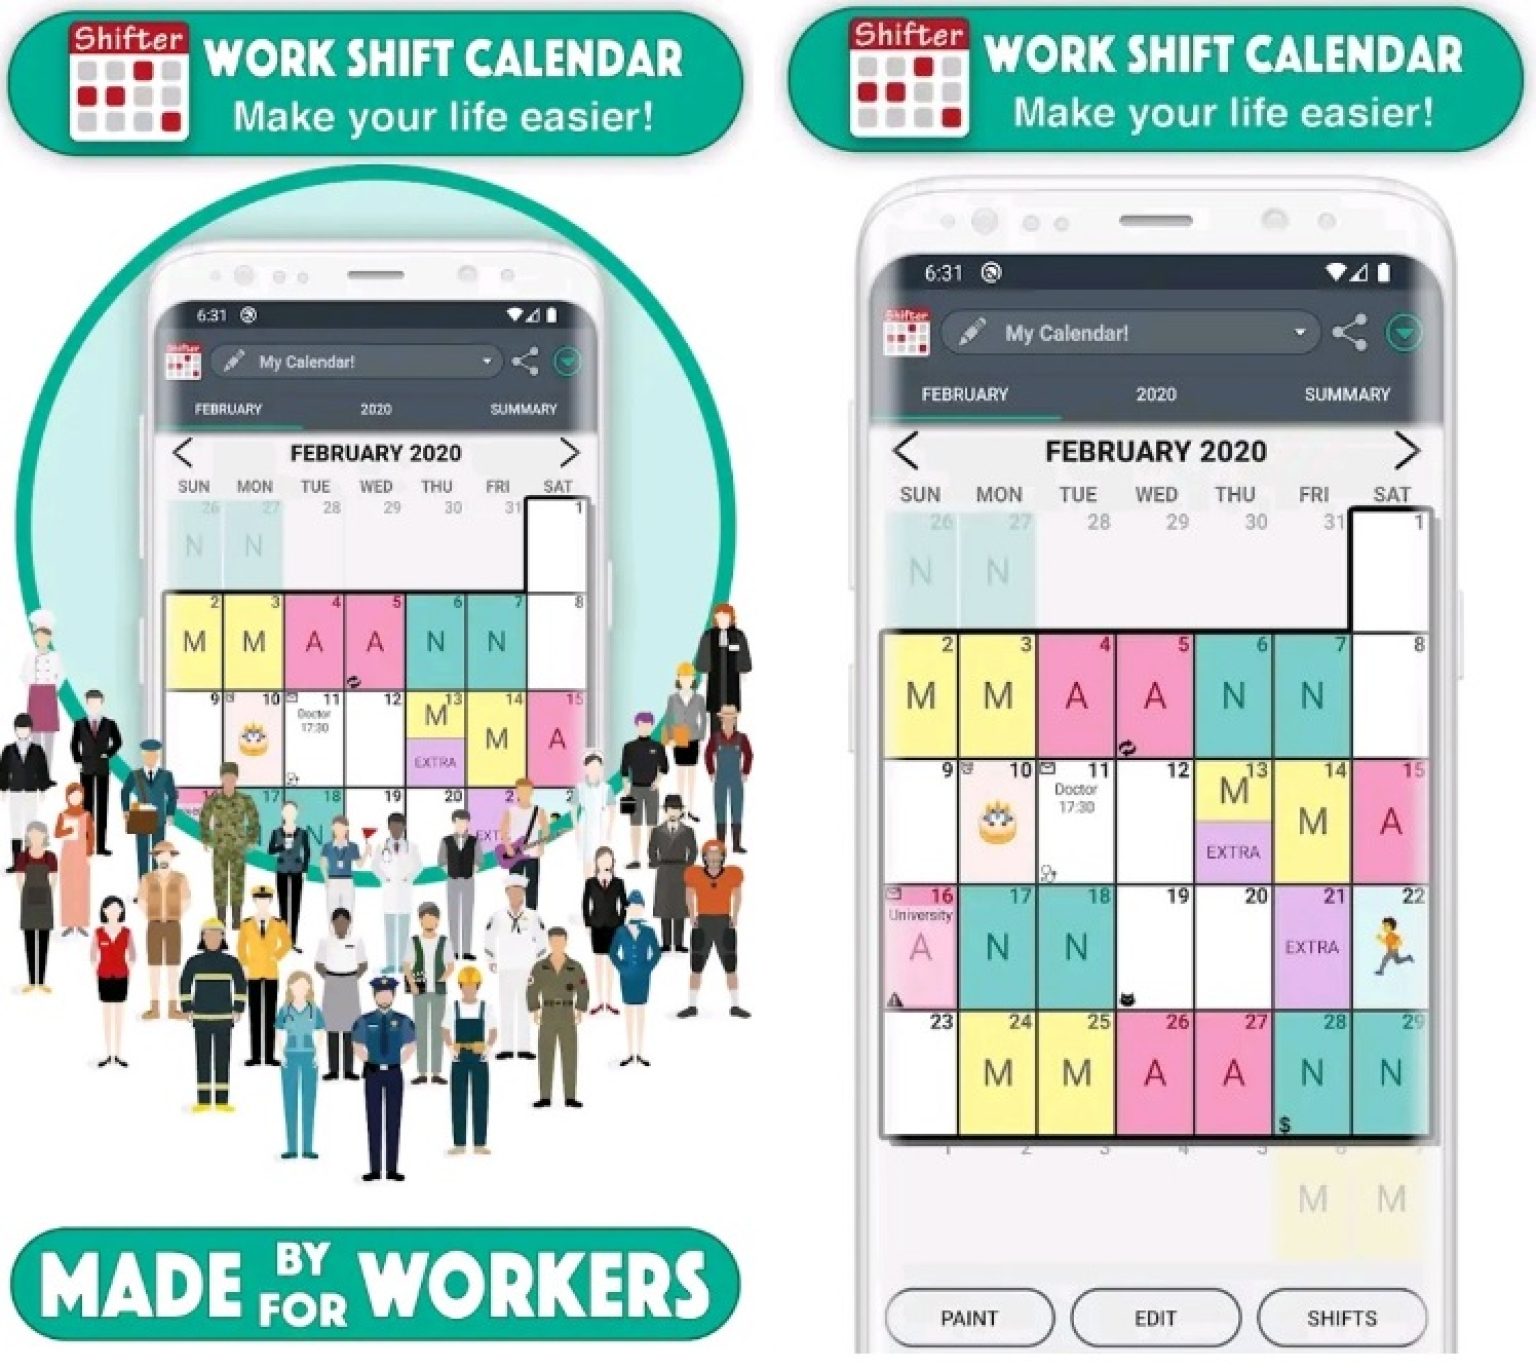 11 Free Shift Work Calendar Apps for Android iOS Freeappsforme